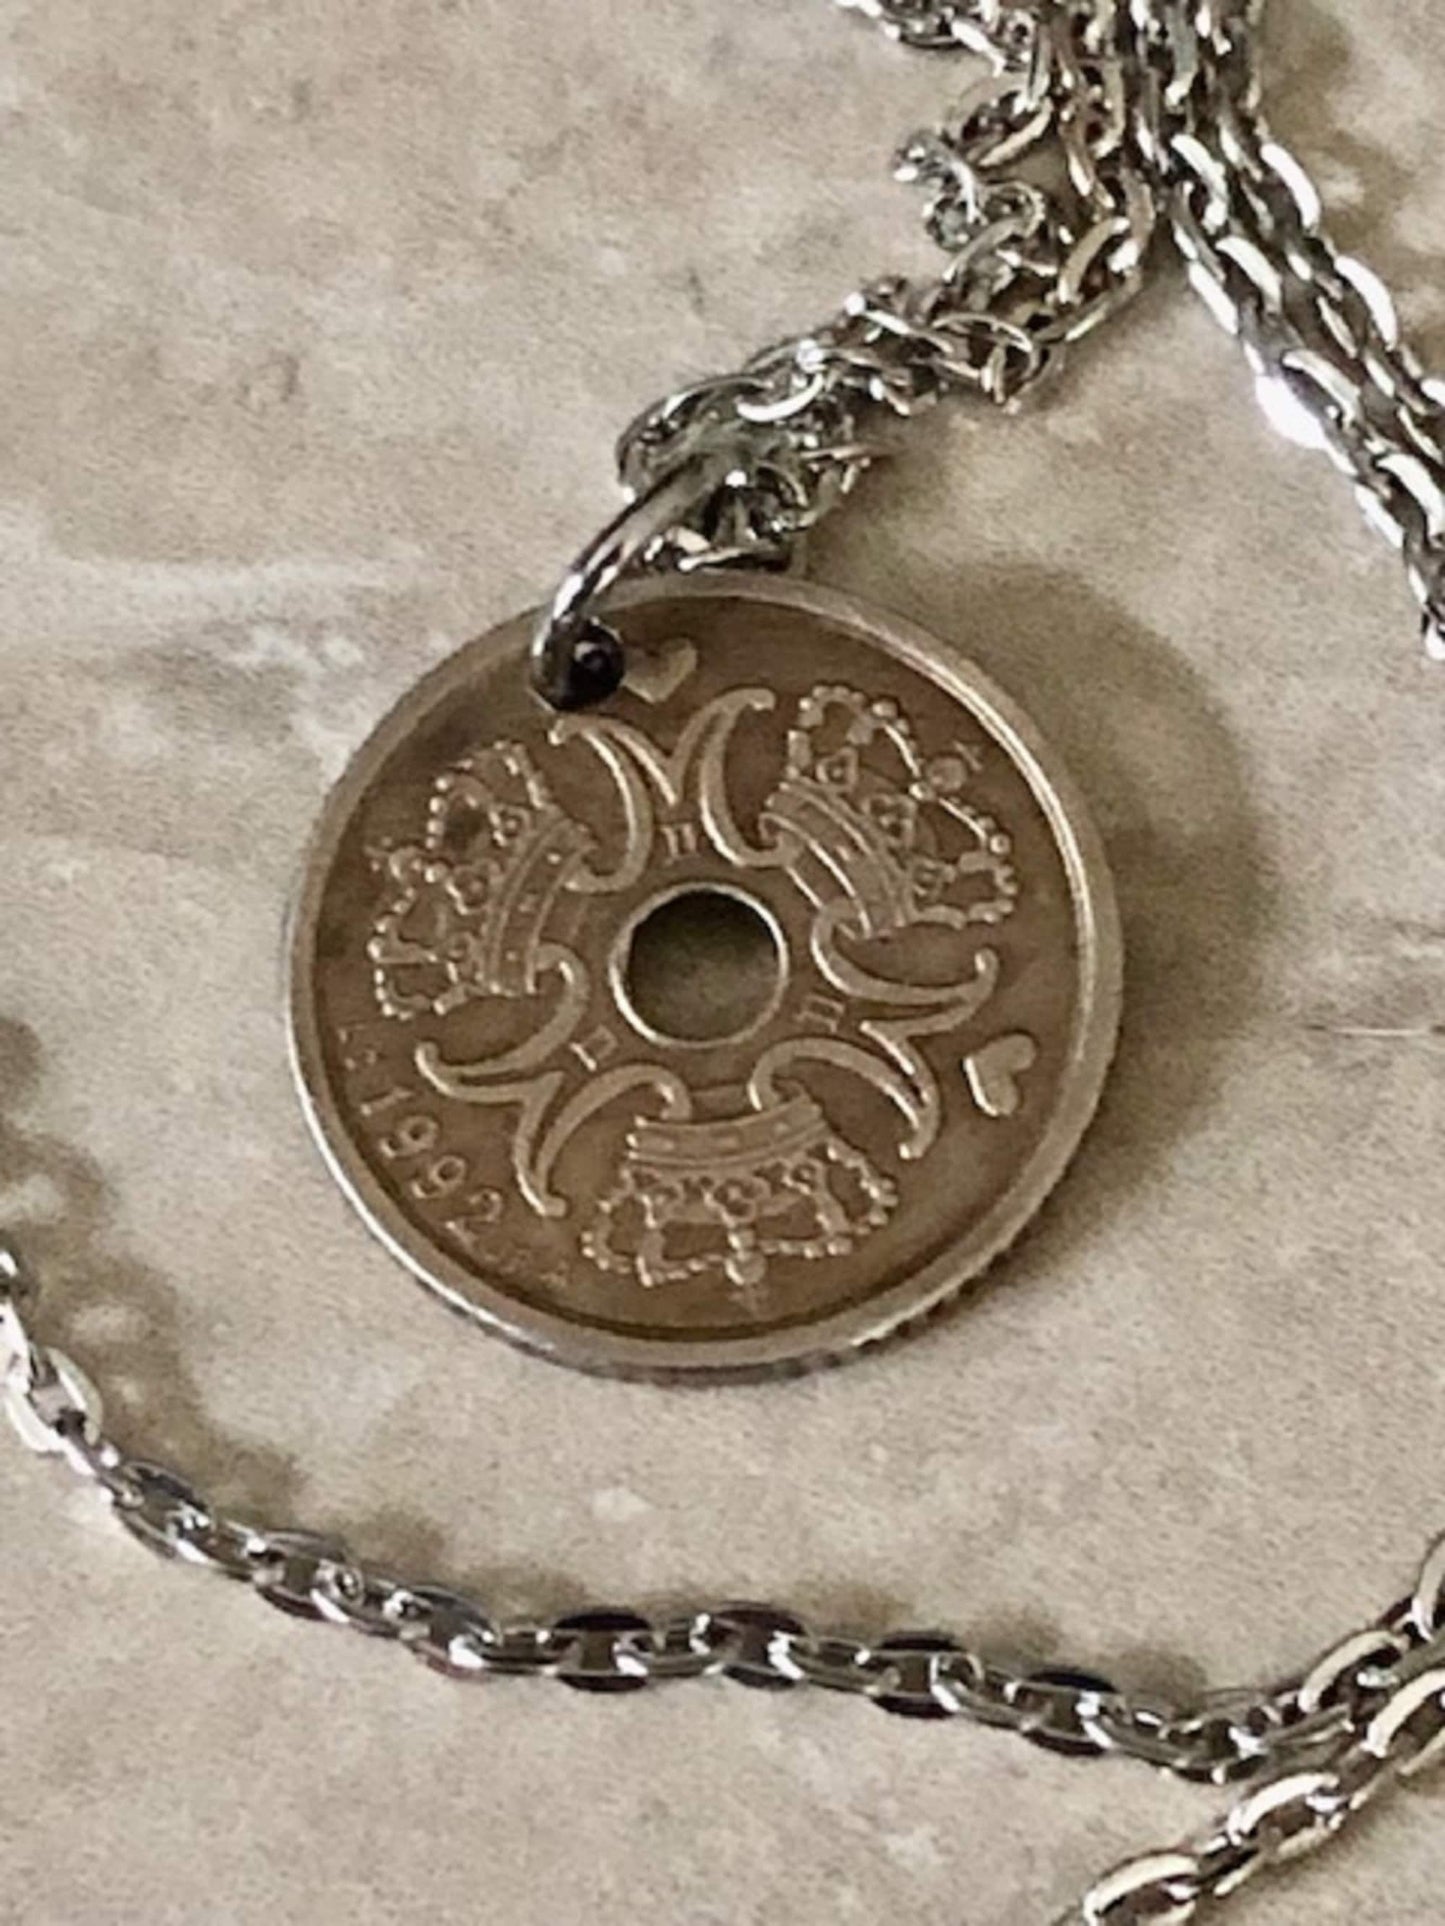 Denmark Coin Pendant 1 Kroner Danmark Personal Necklace Old Vintage Handmade Jewelry Gift Friend Charm For Him Her World Coin Collector